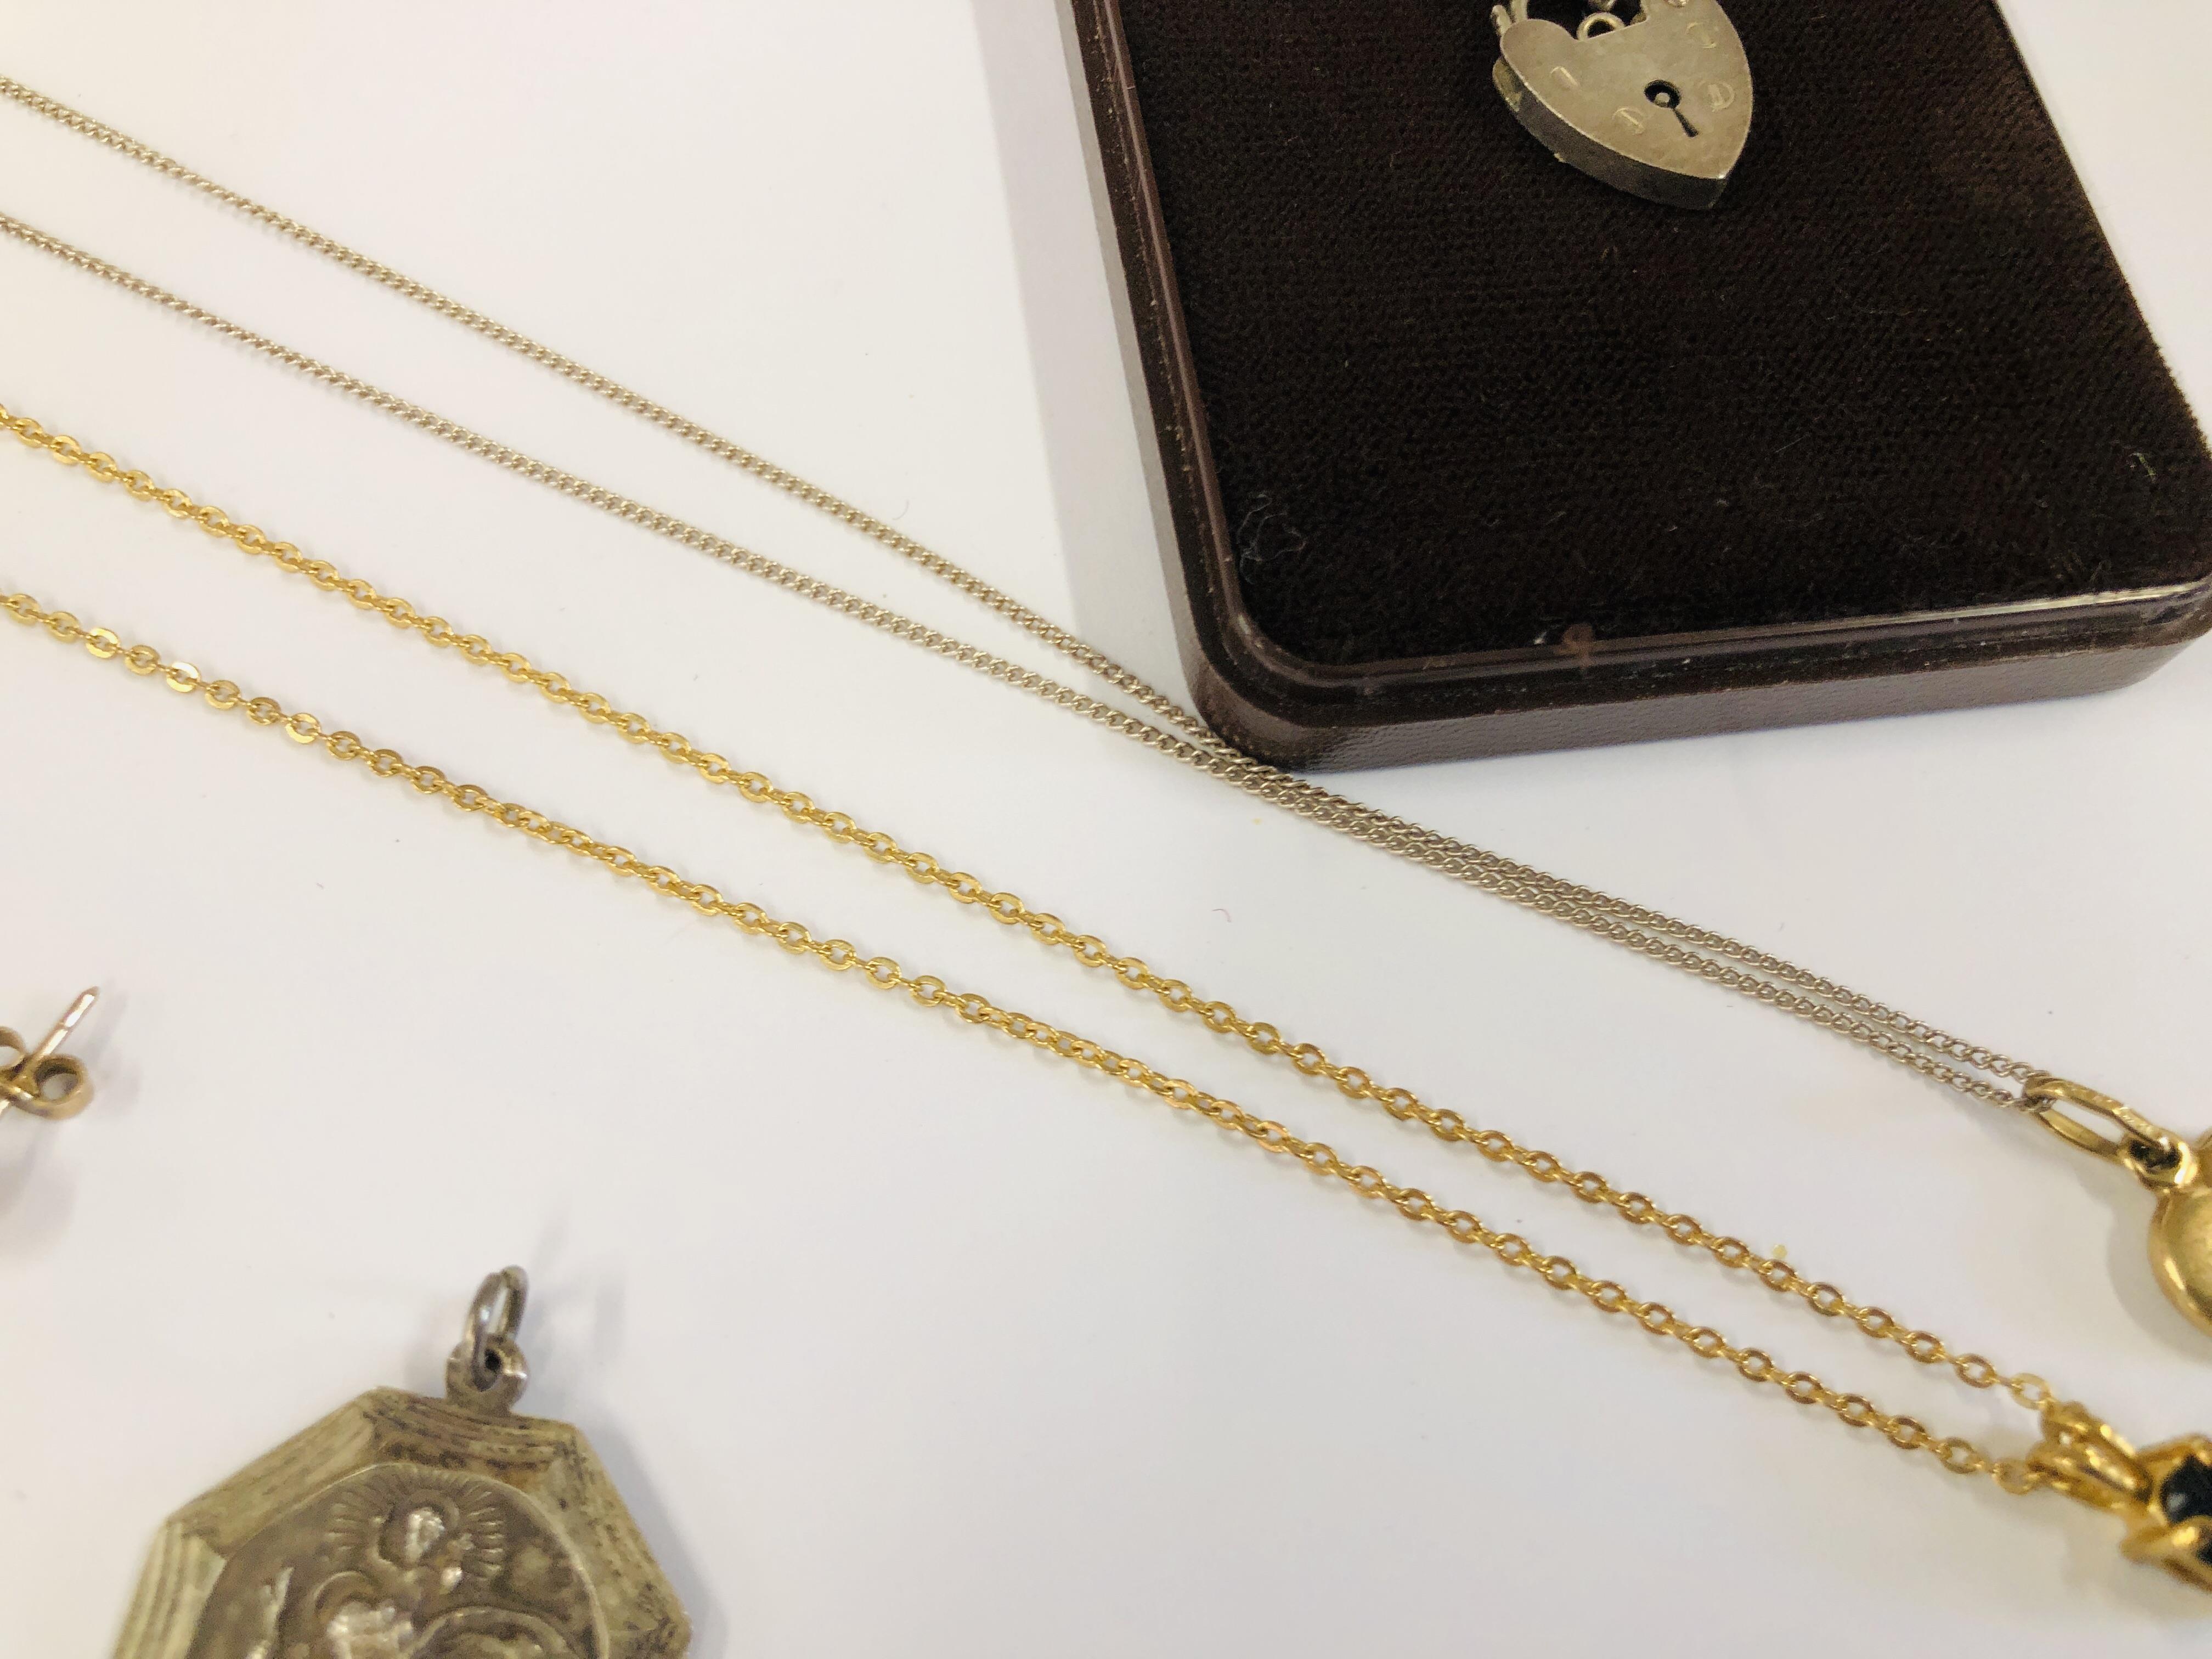 YELLOW METAL SINGLE STONE PENDANT AND NECKLACE, 9CT GOLD HEART PENDANT ON A SILVER CHAIN, - Image 3 of 10